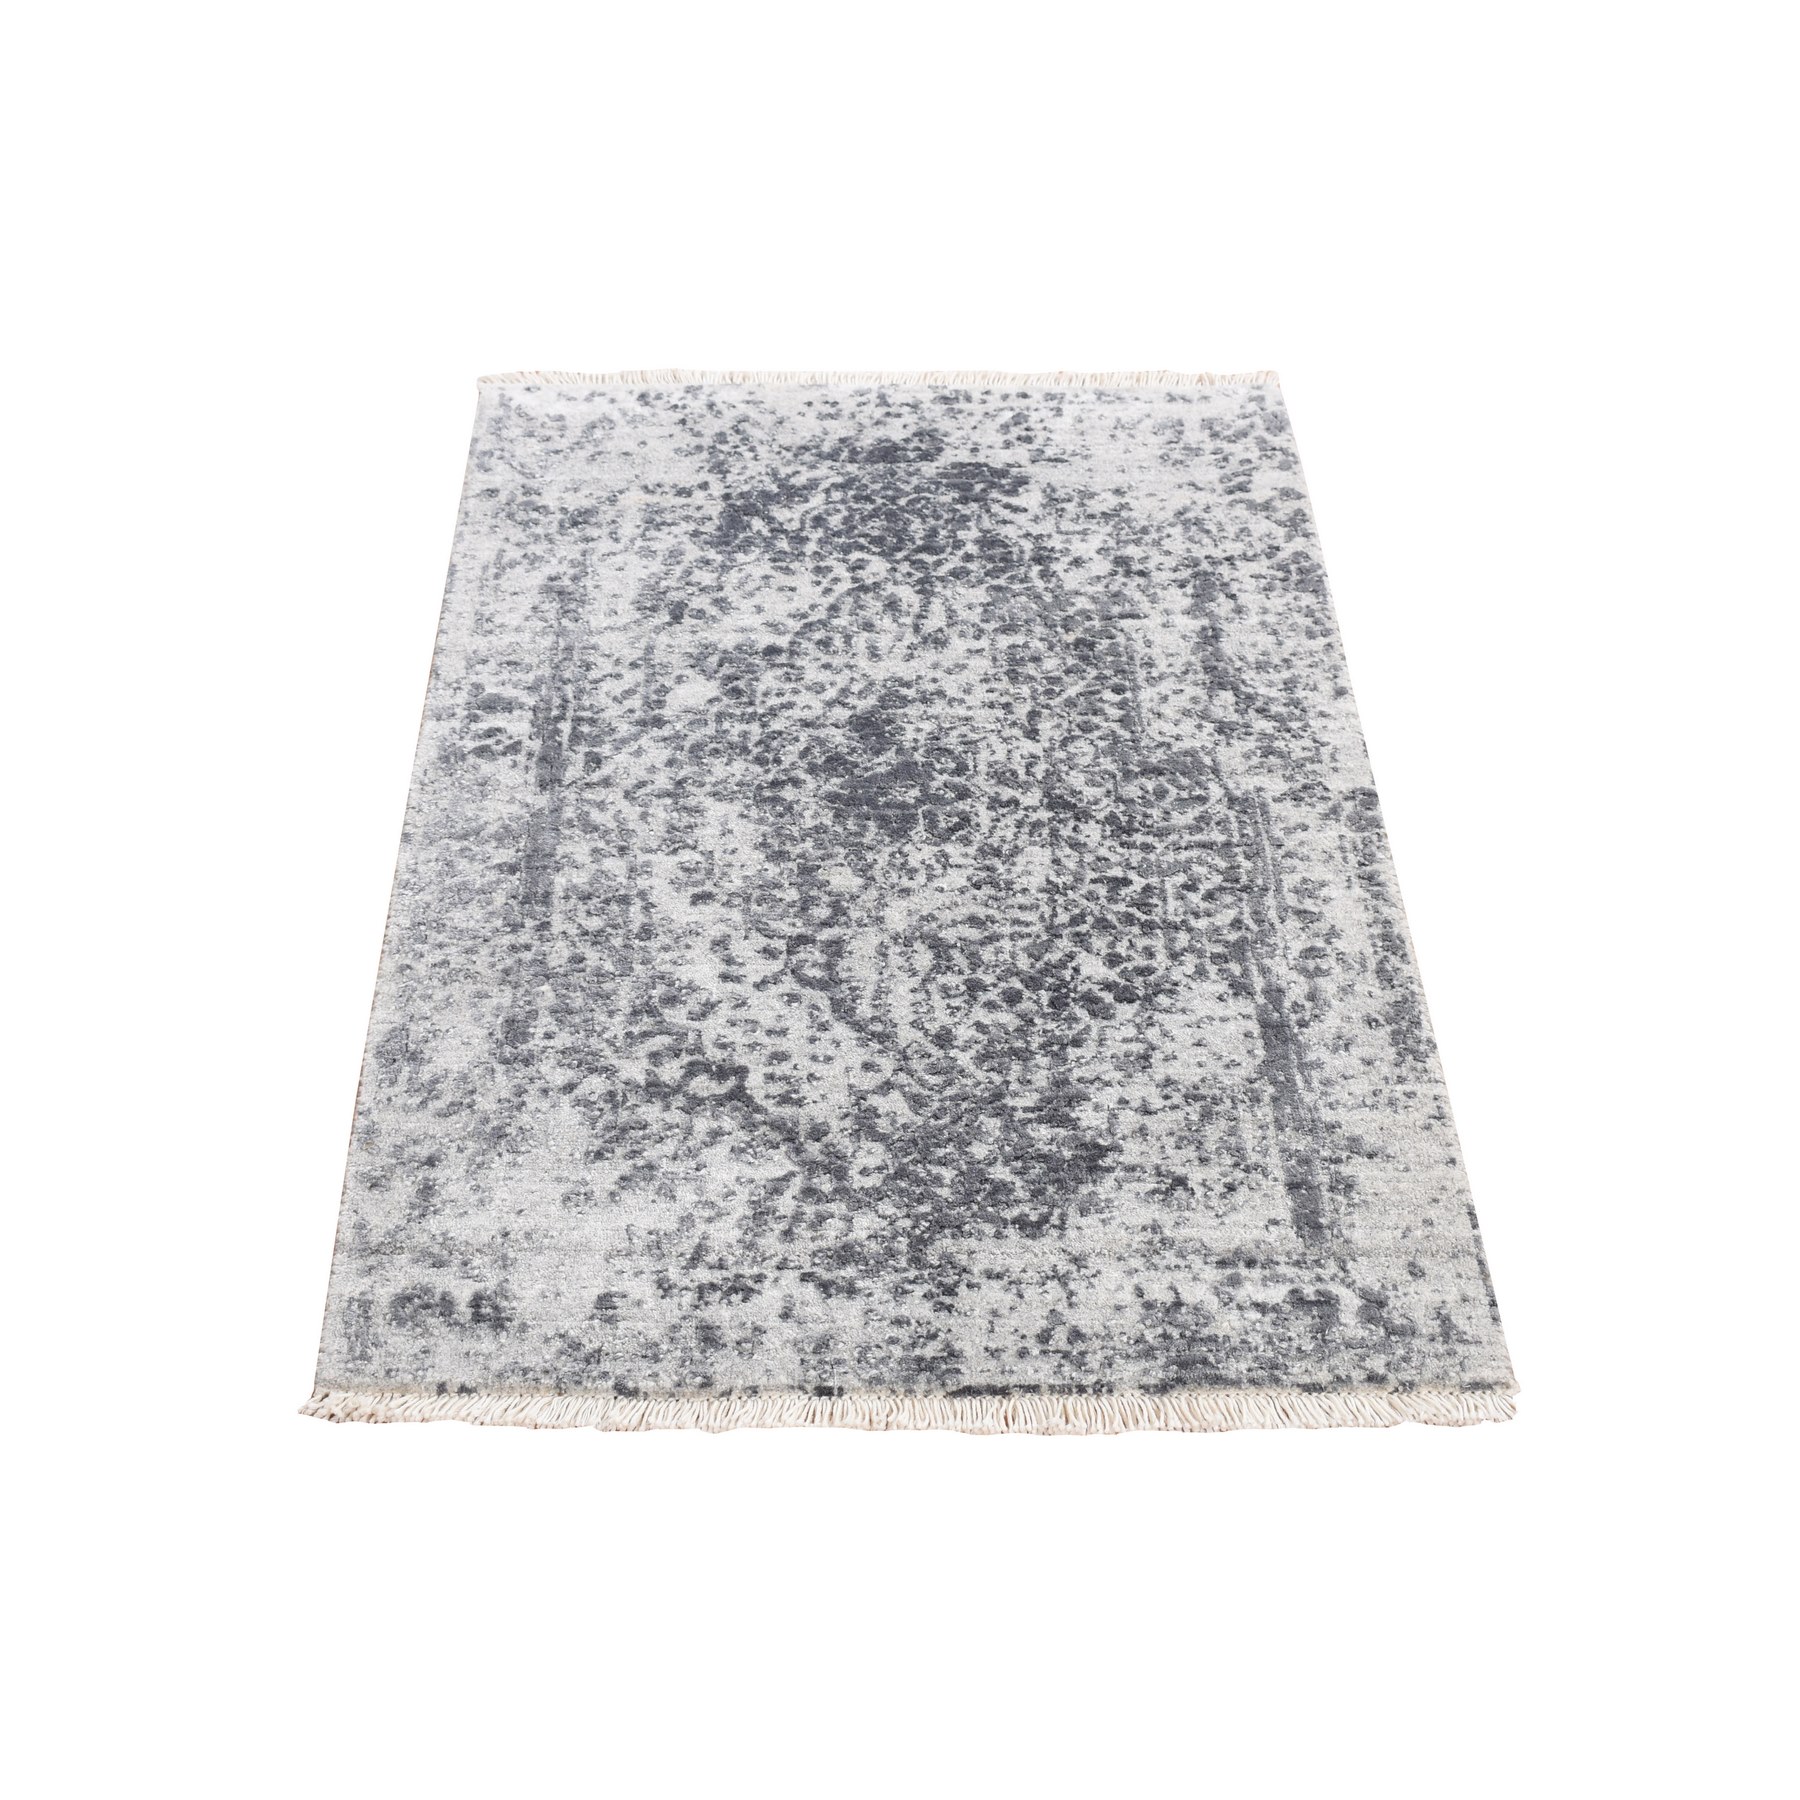  Silk Hand-Knotted Area Rug 2'1